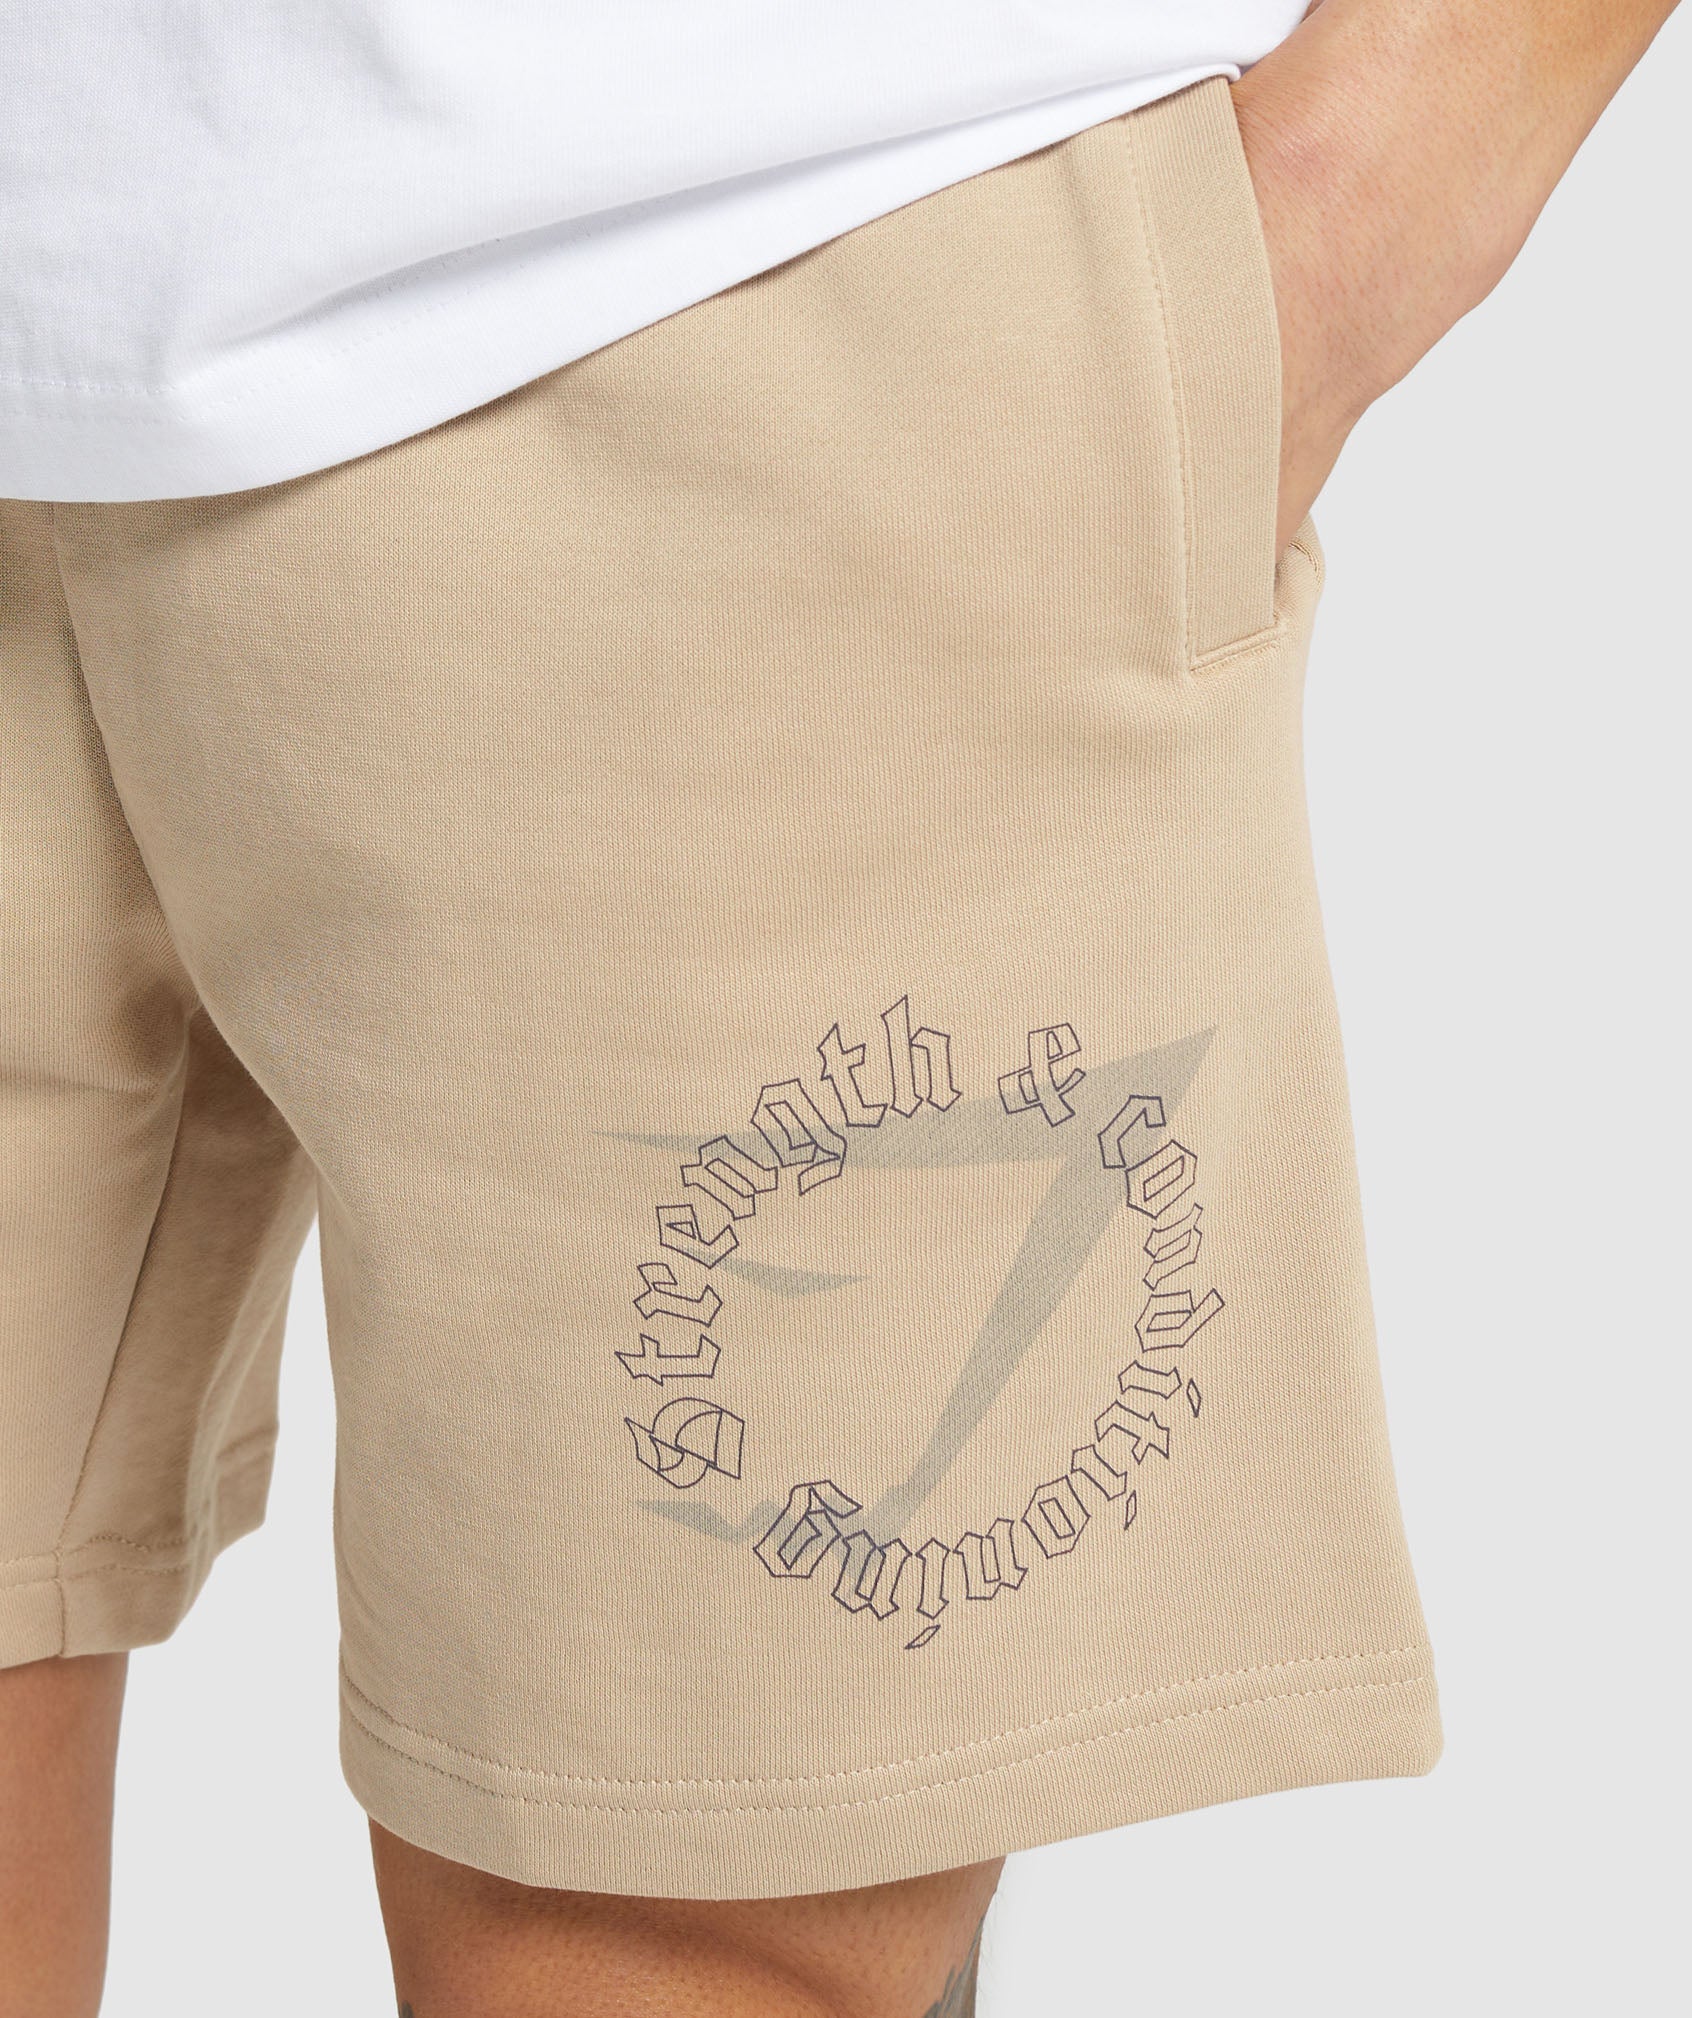 Strength and Conditioning 7" Shorts in Vanilla Beige - view 5